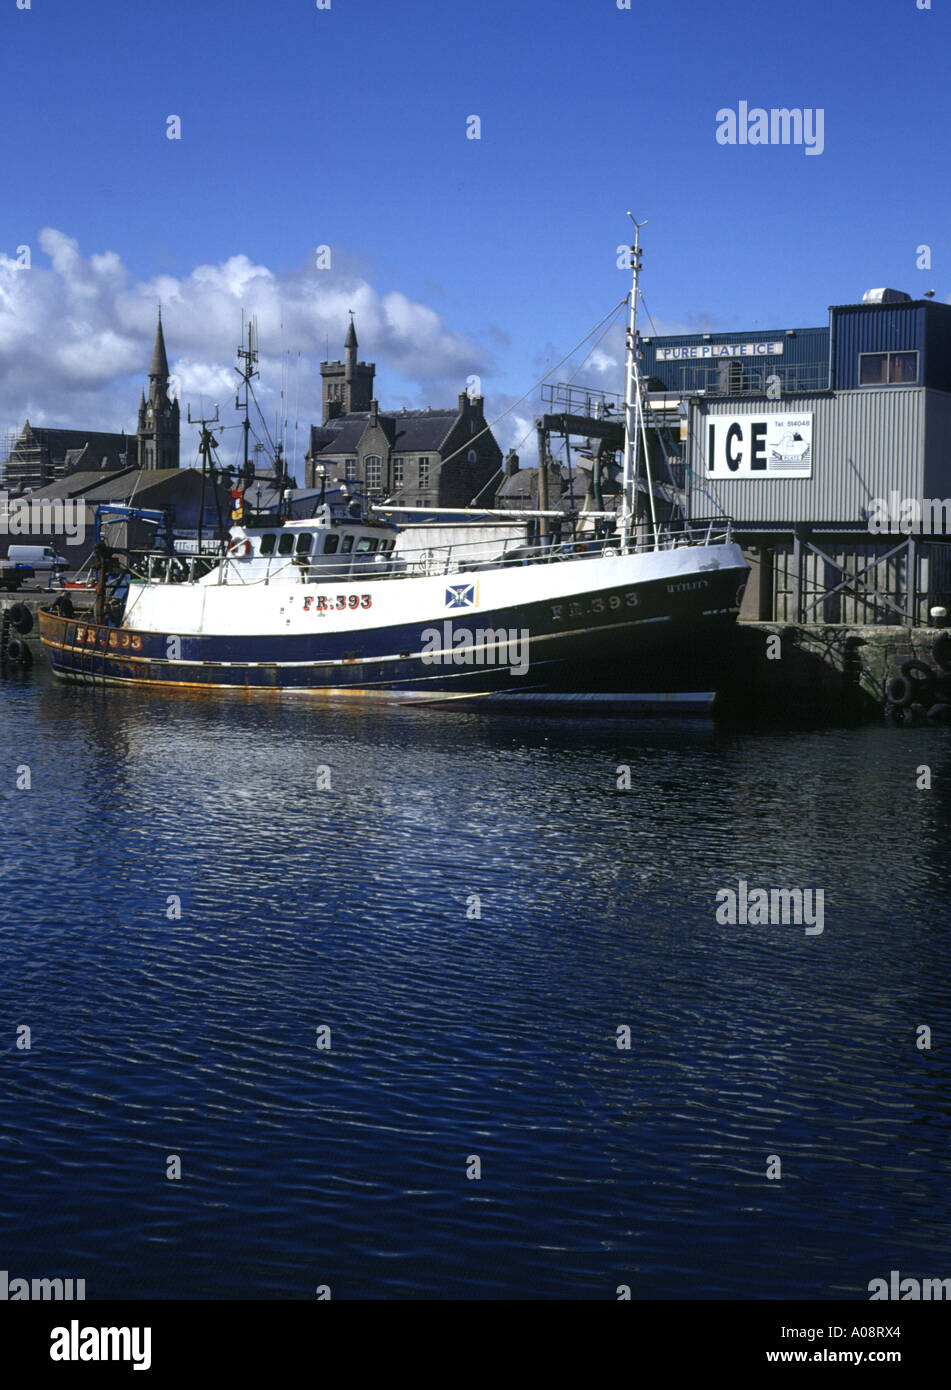 dh Harbour FRASERBURGH ABERDEENSHIRE Fishing boat alongside Ice loader quay Stock Photo